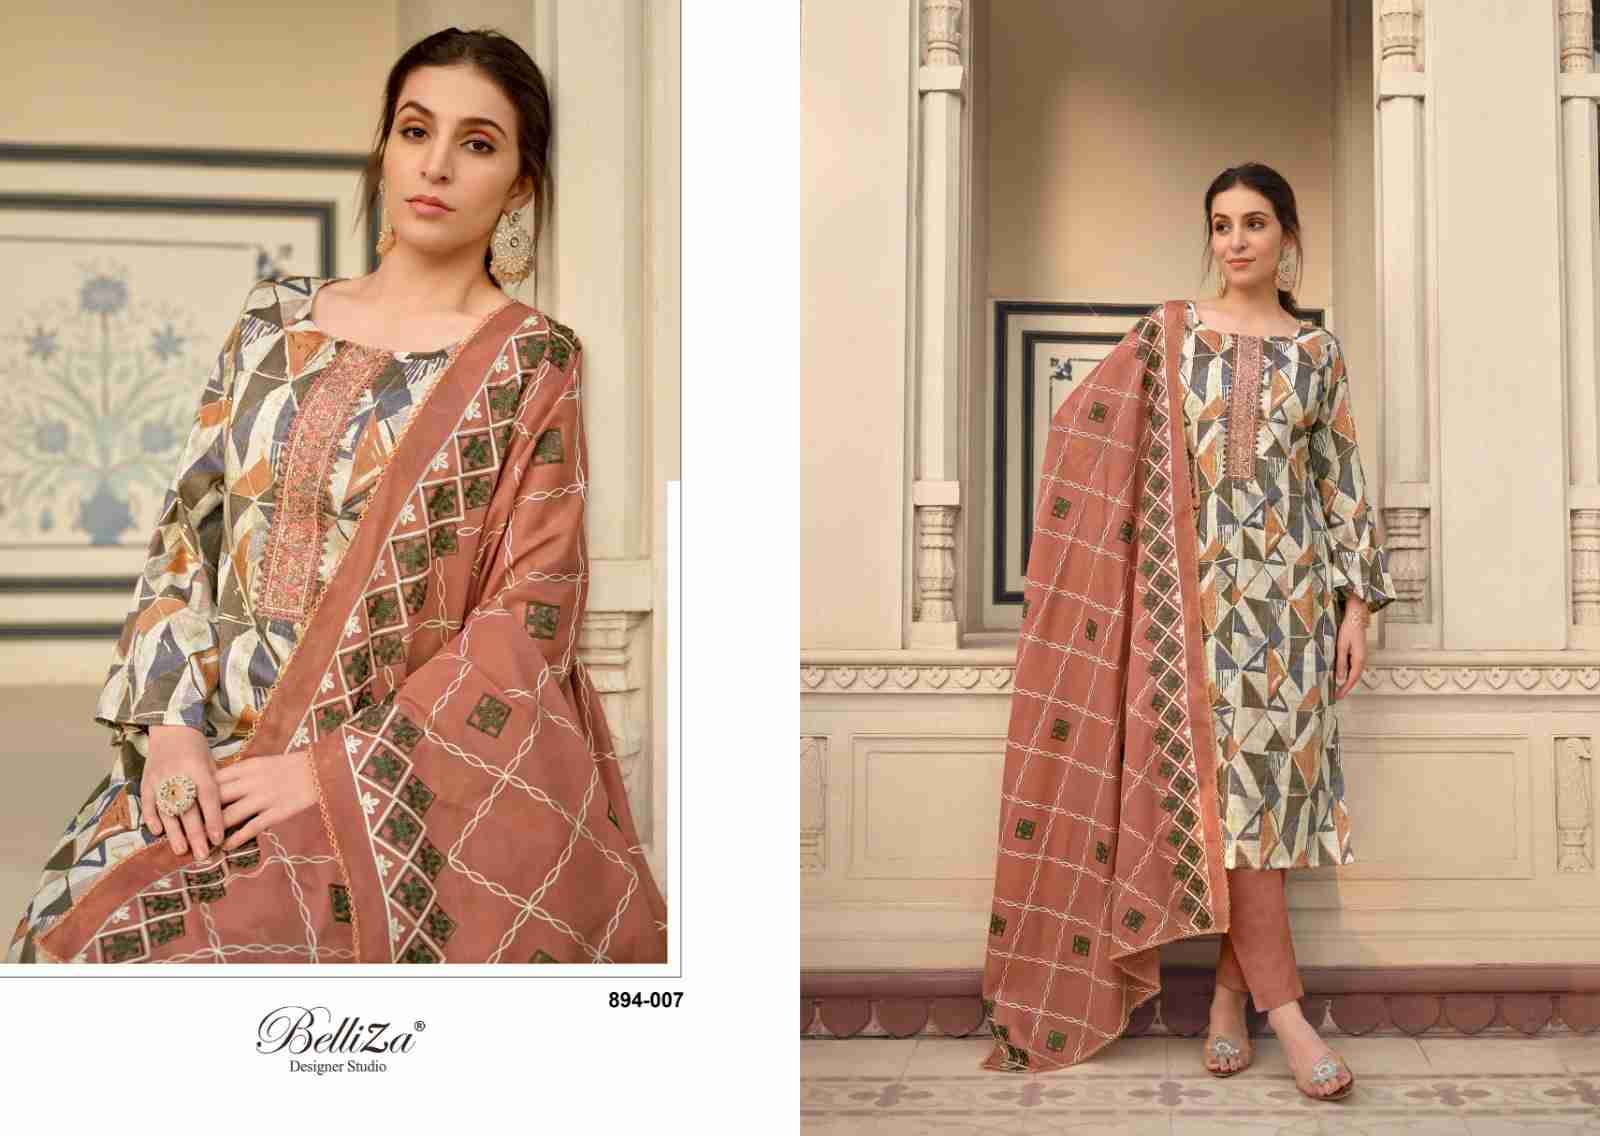 Sophia Vol-2 By Belliza 894-001 To 894-008 Series Indian Traditional Wear Collection Beautiful Stylish Fancy Colorful Party Wear & Wear Pure Cotton Digital Printed Dress At Wholesale Price